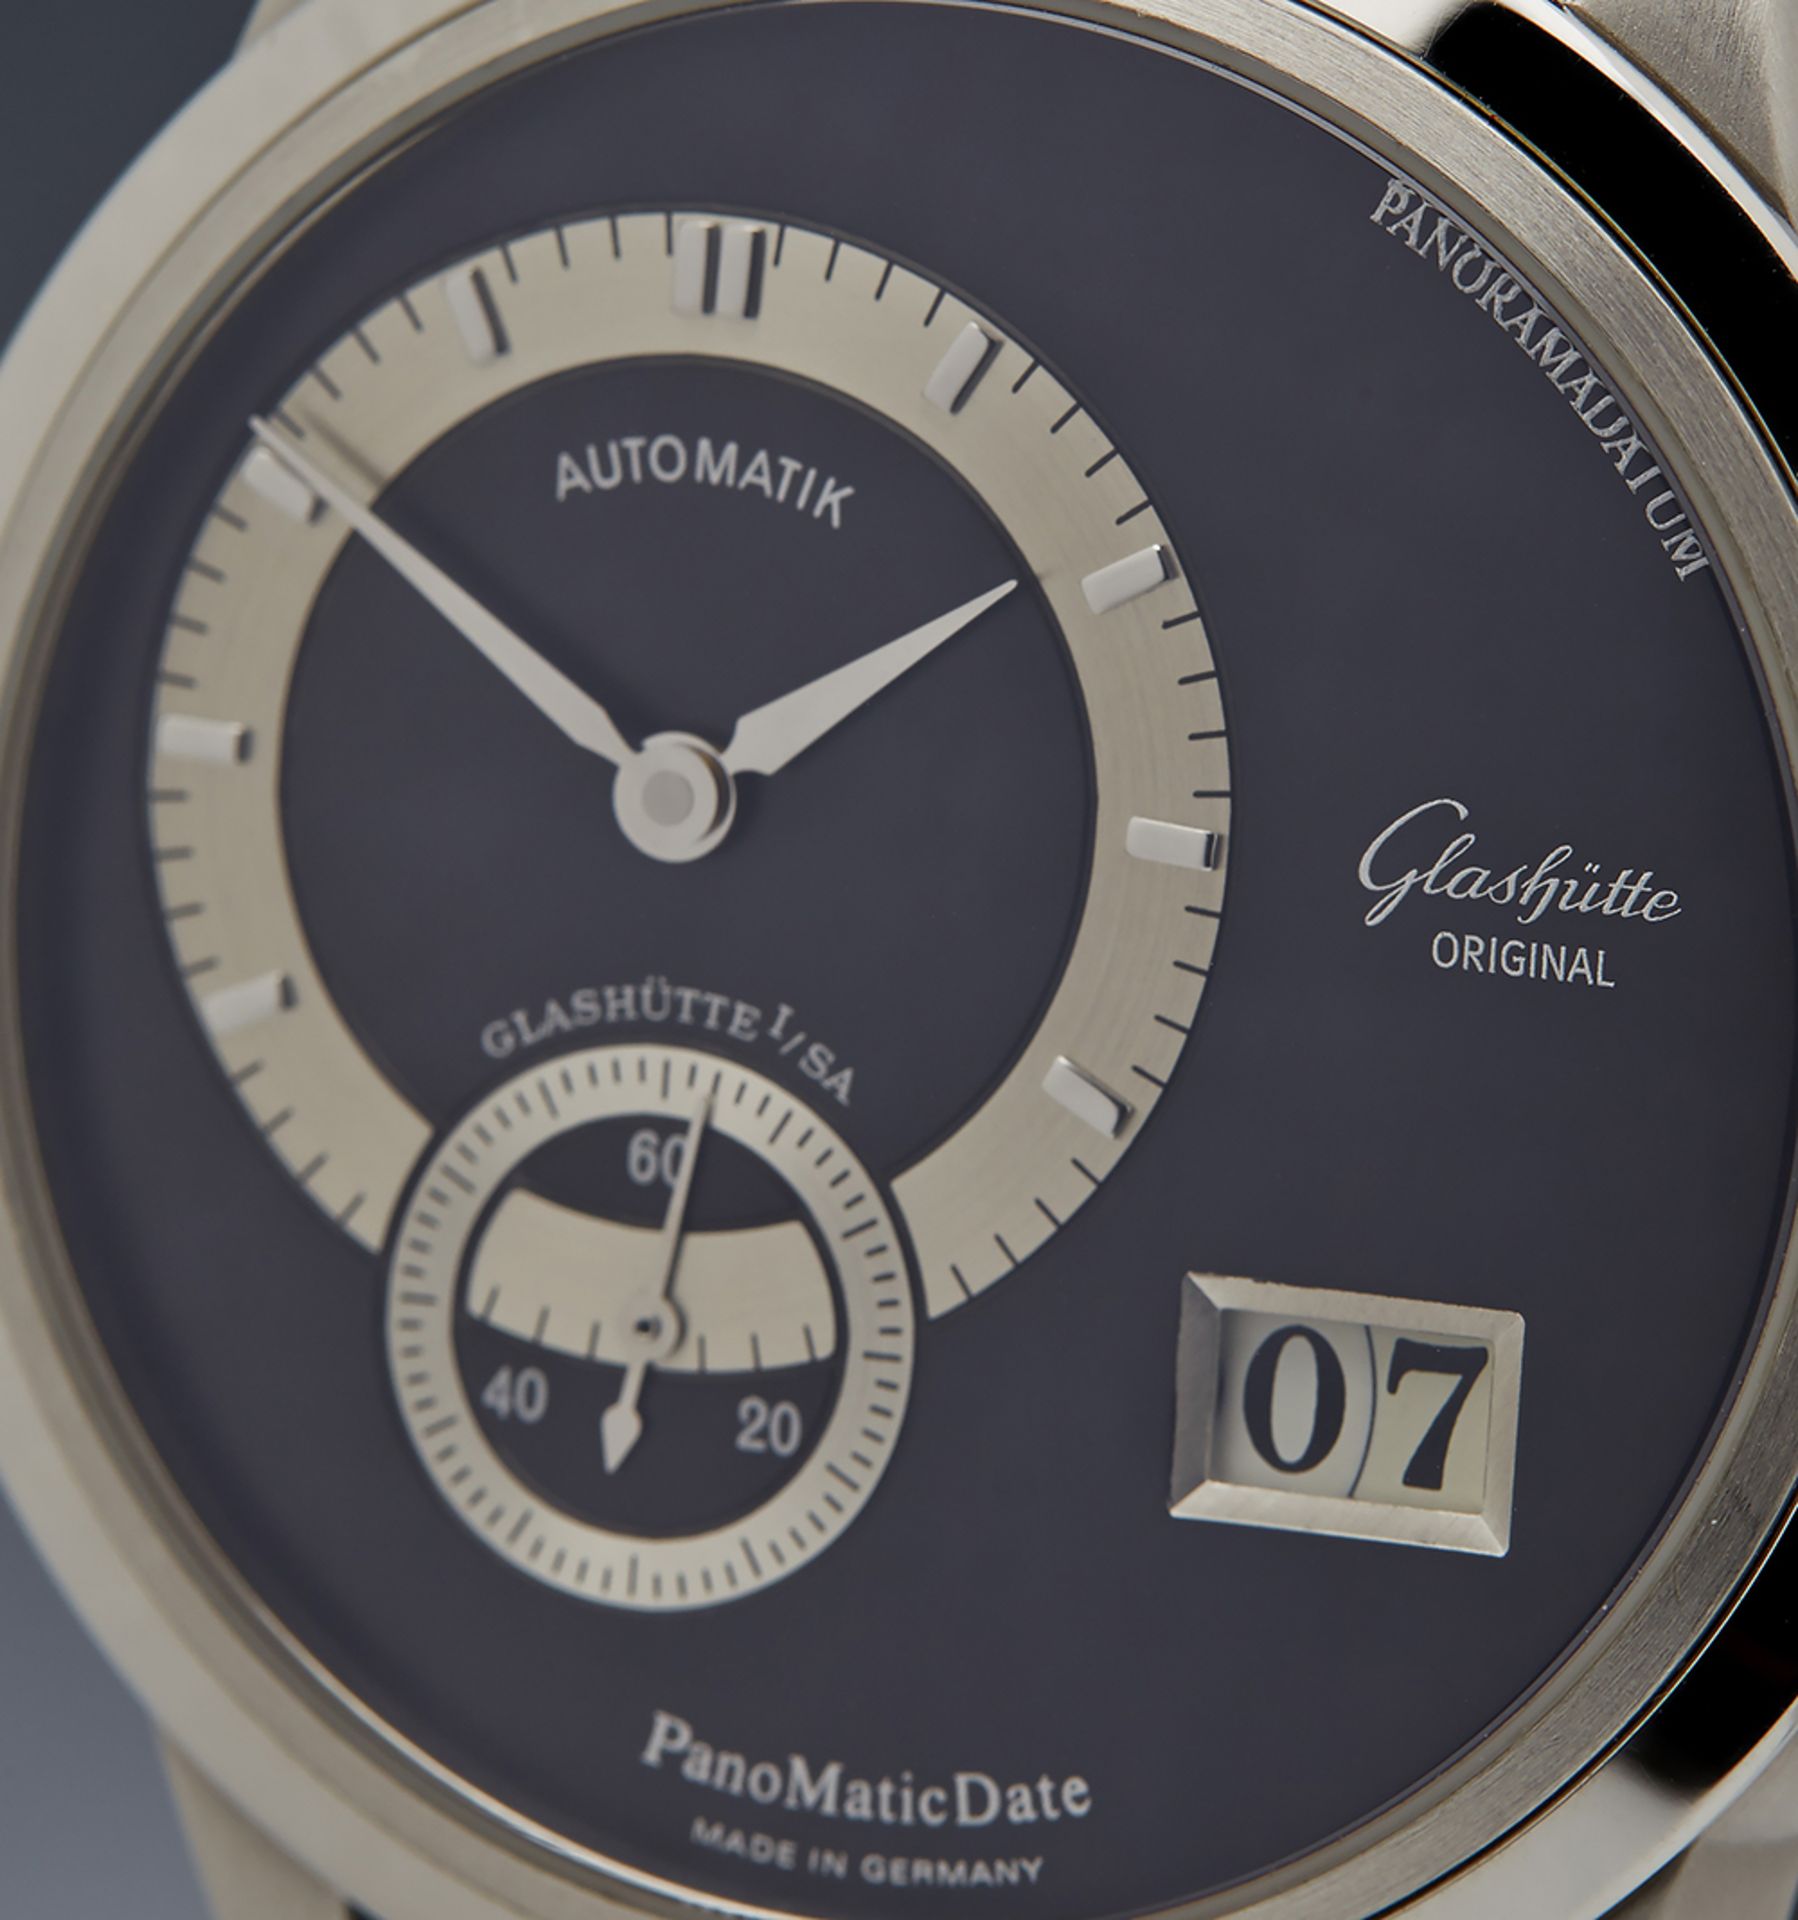 Glashutte, Panomatic Date Platinum Limited Edition 9001030304 - Image 2 of 11